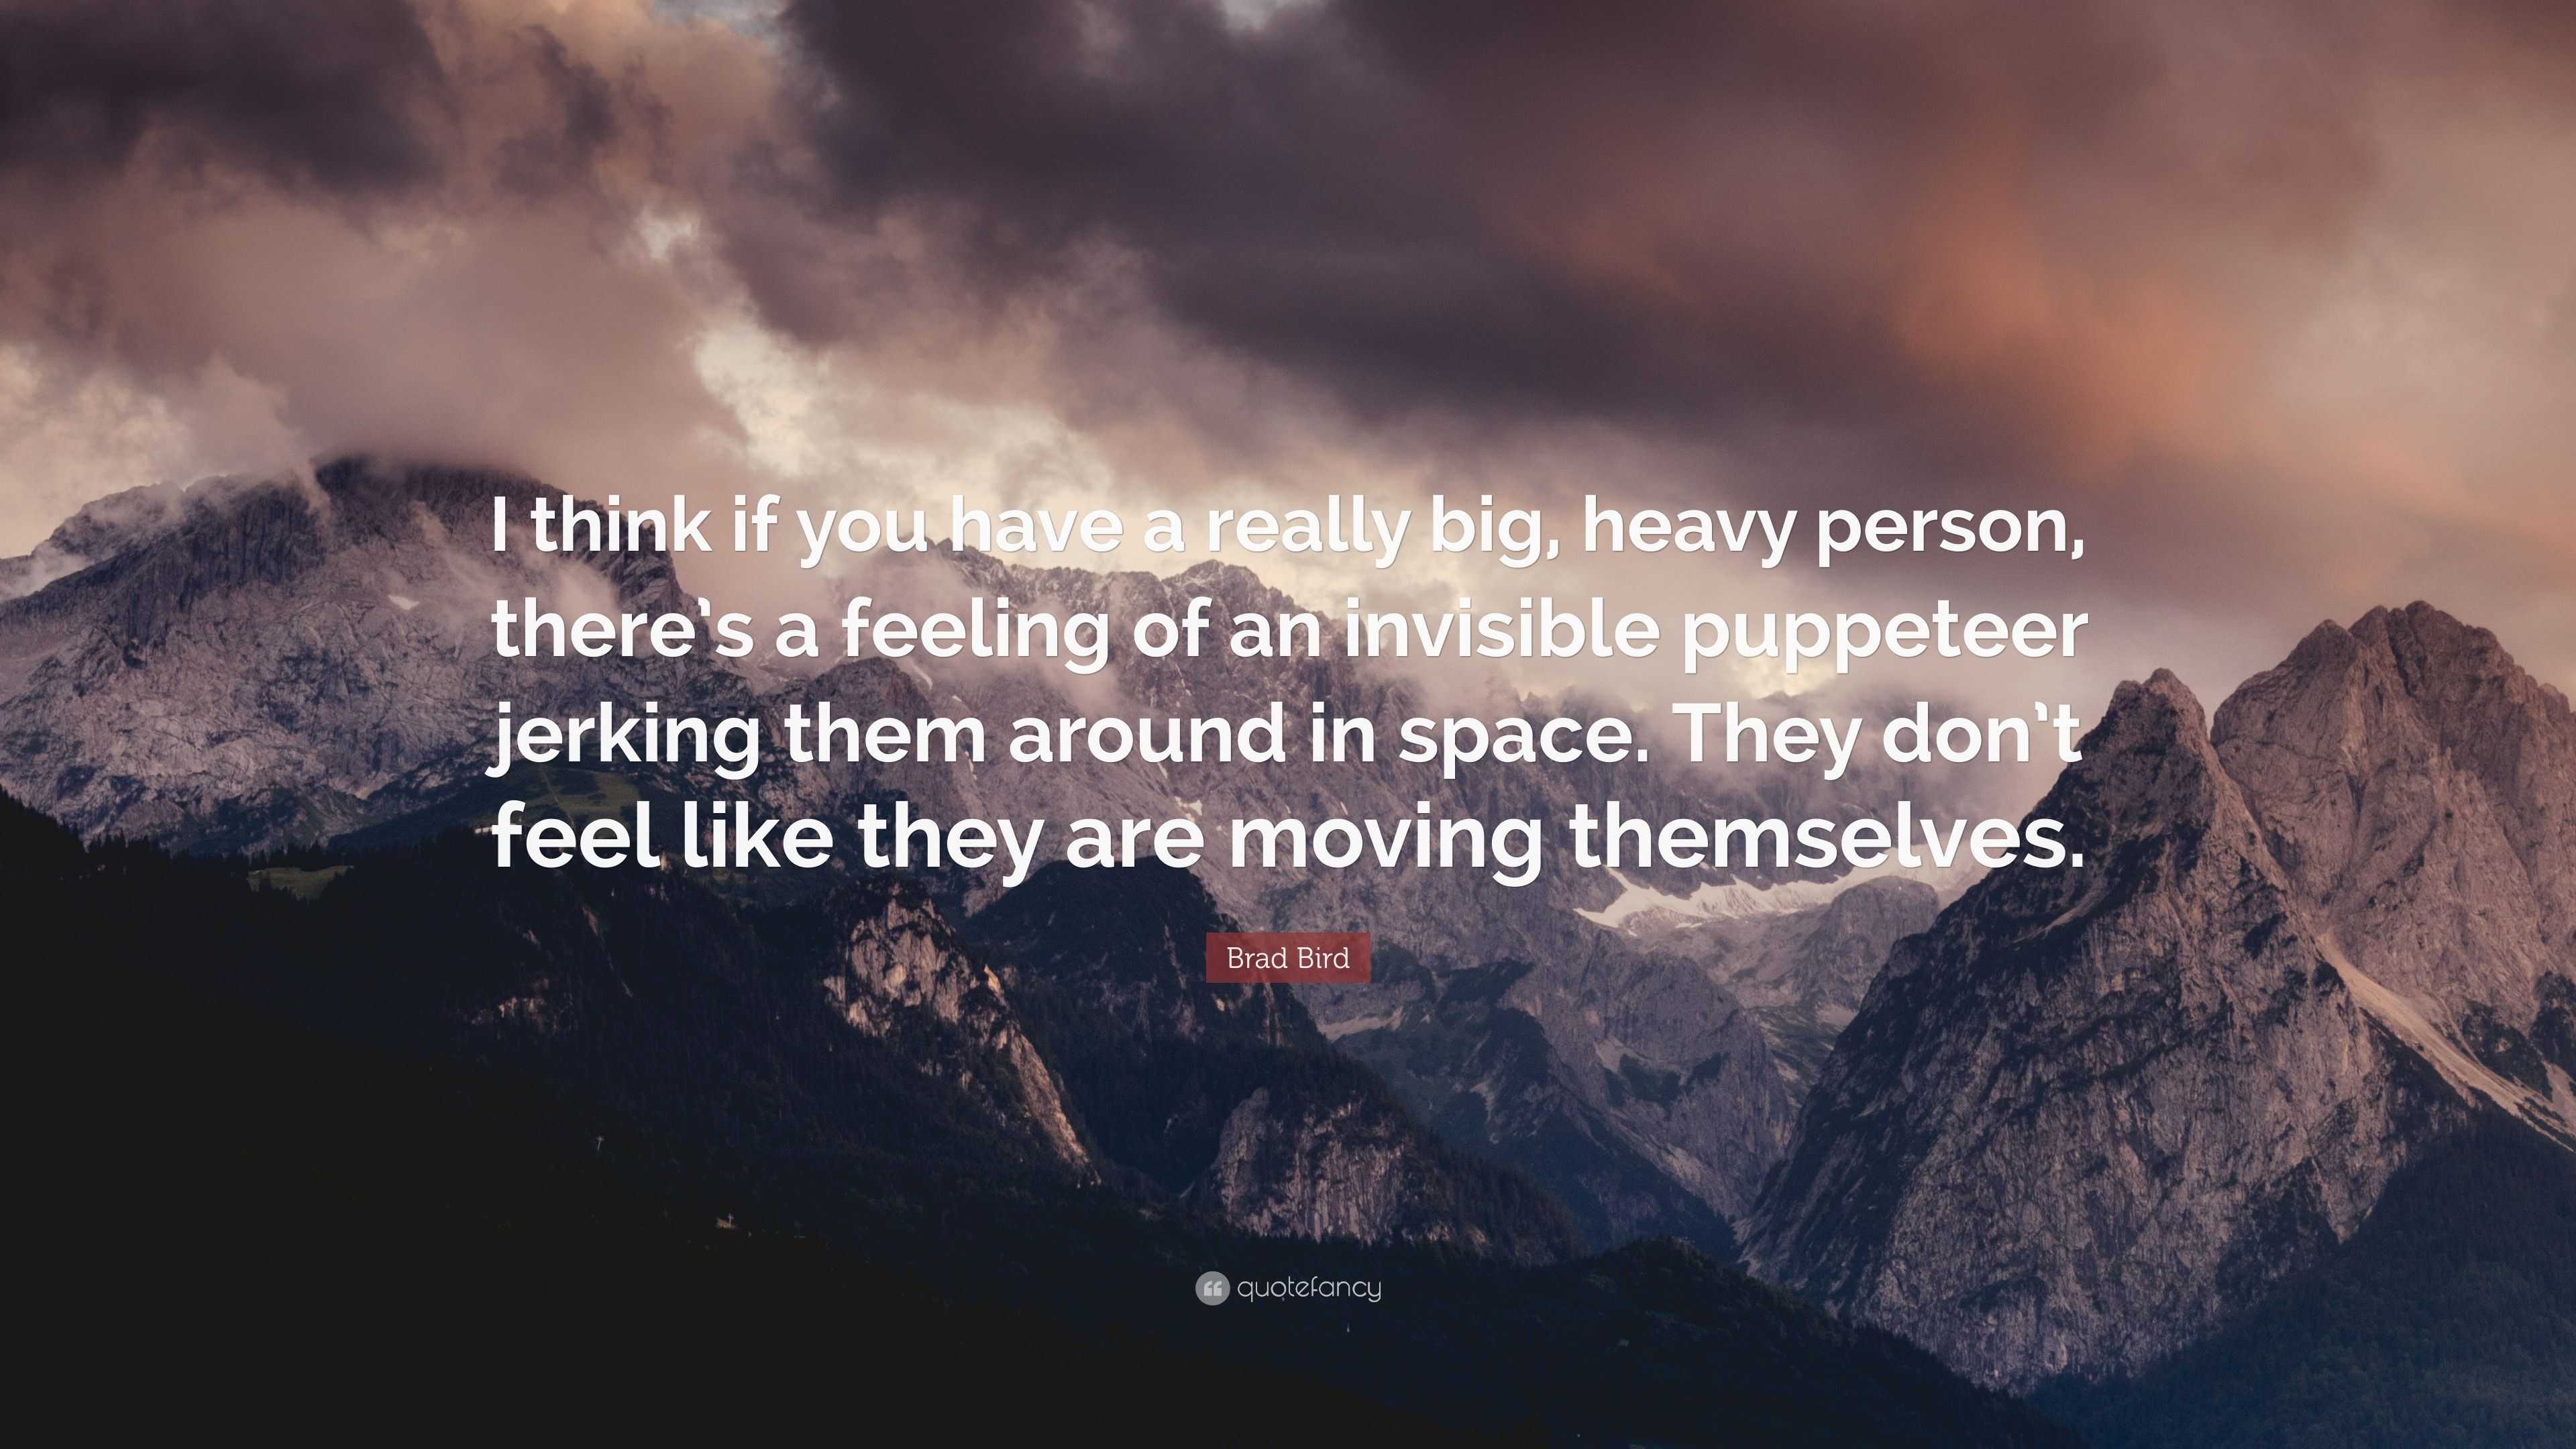 https://quotefancy.com/media/wallpaper/3840x2160/4473264-Brad-Bird-Quote-I-think-if-you-have-a-really-big-heavy-person.jpg